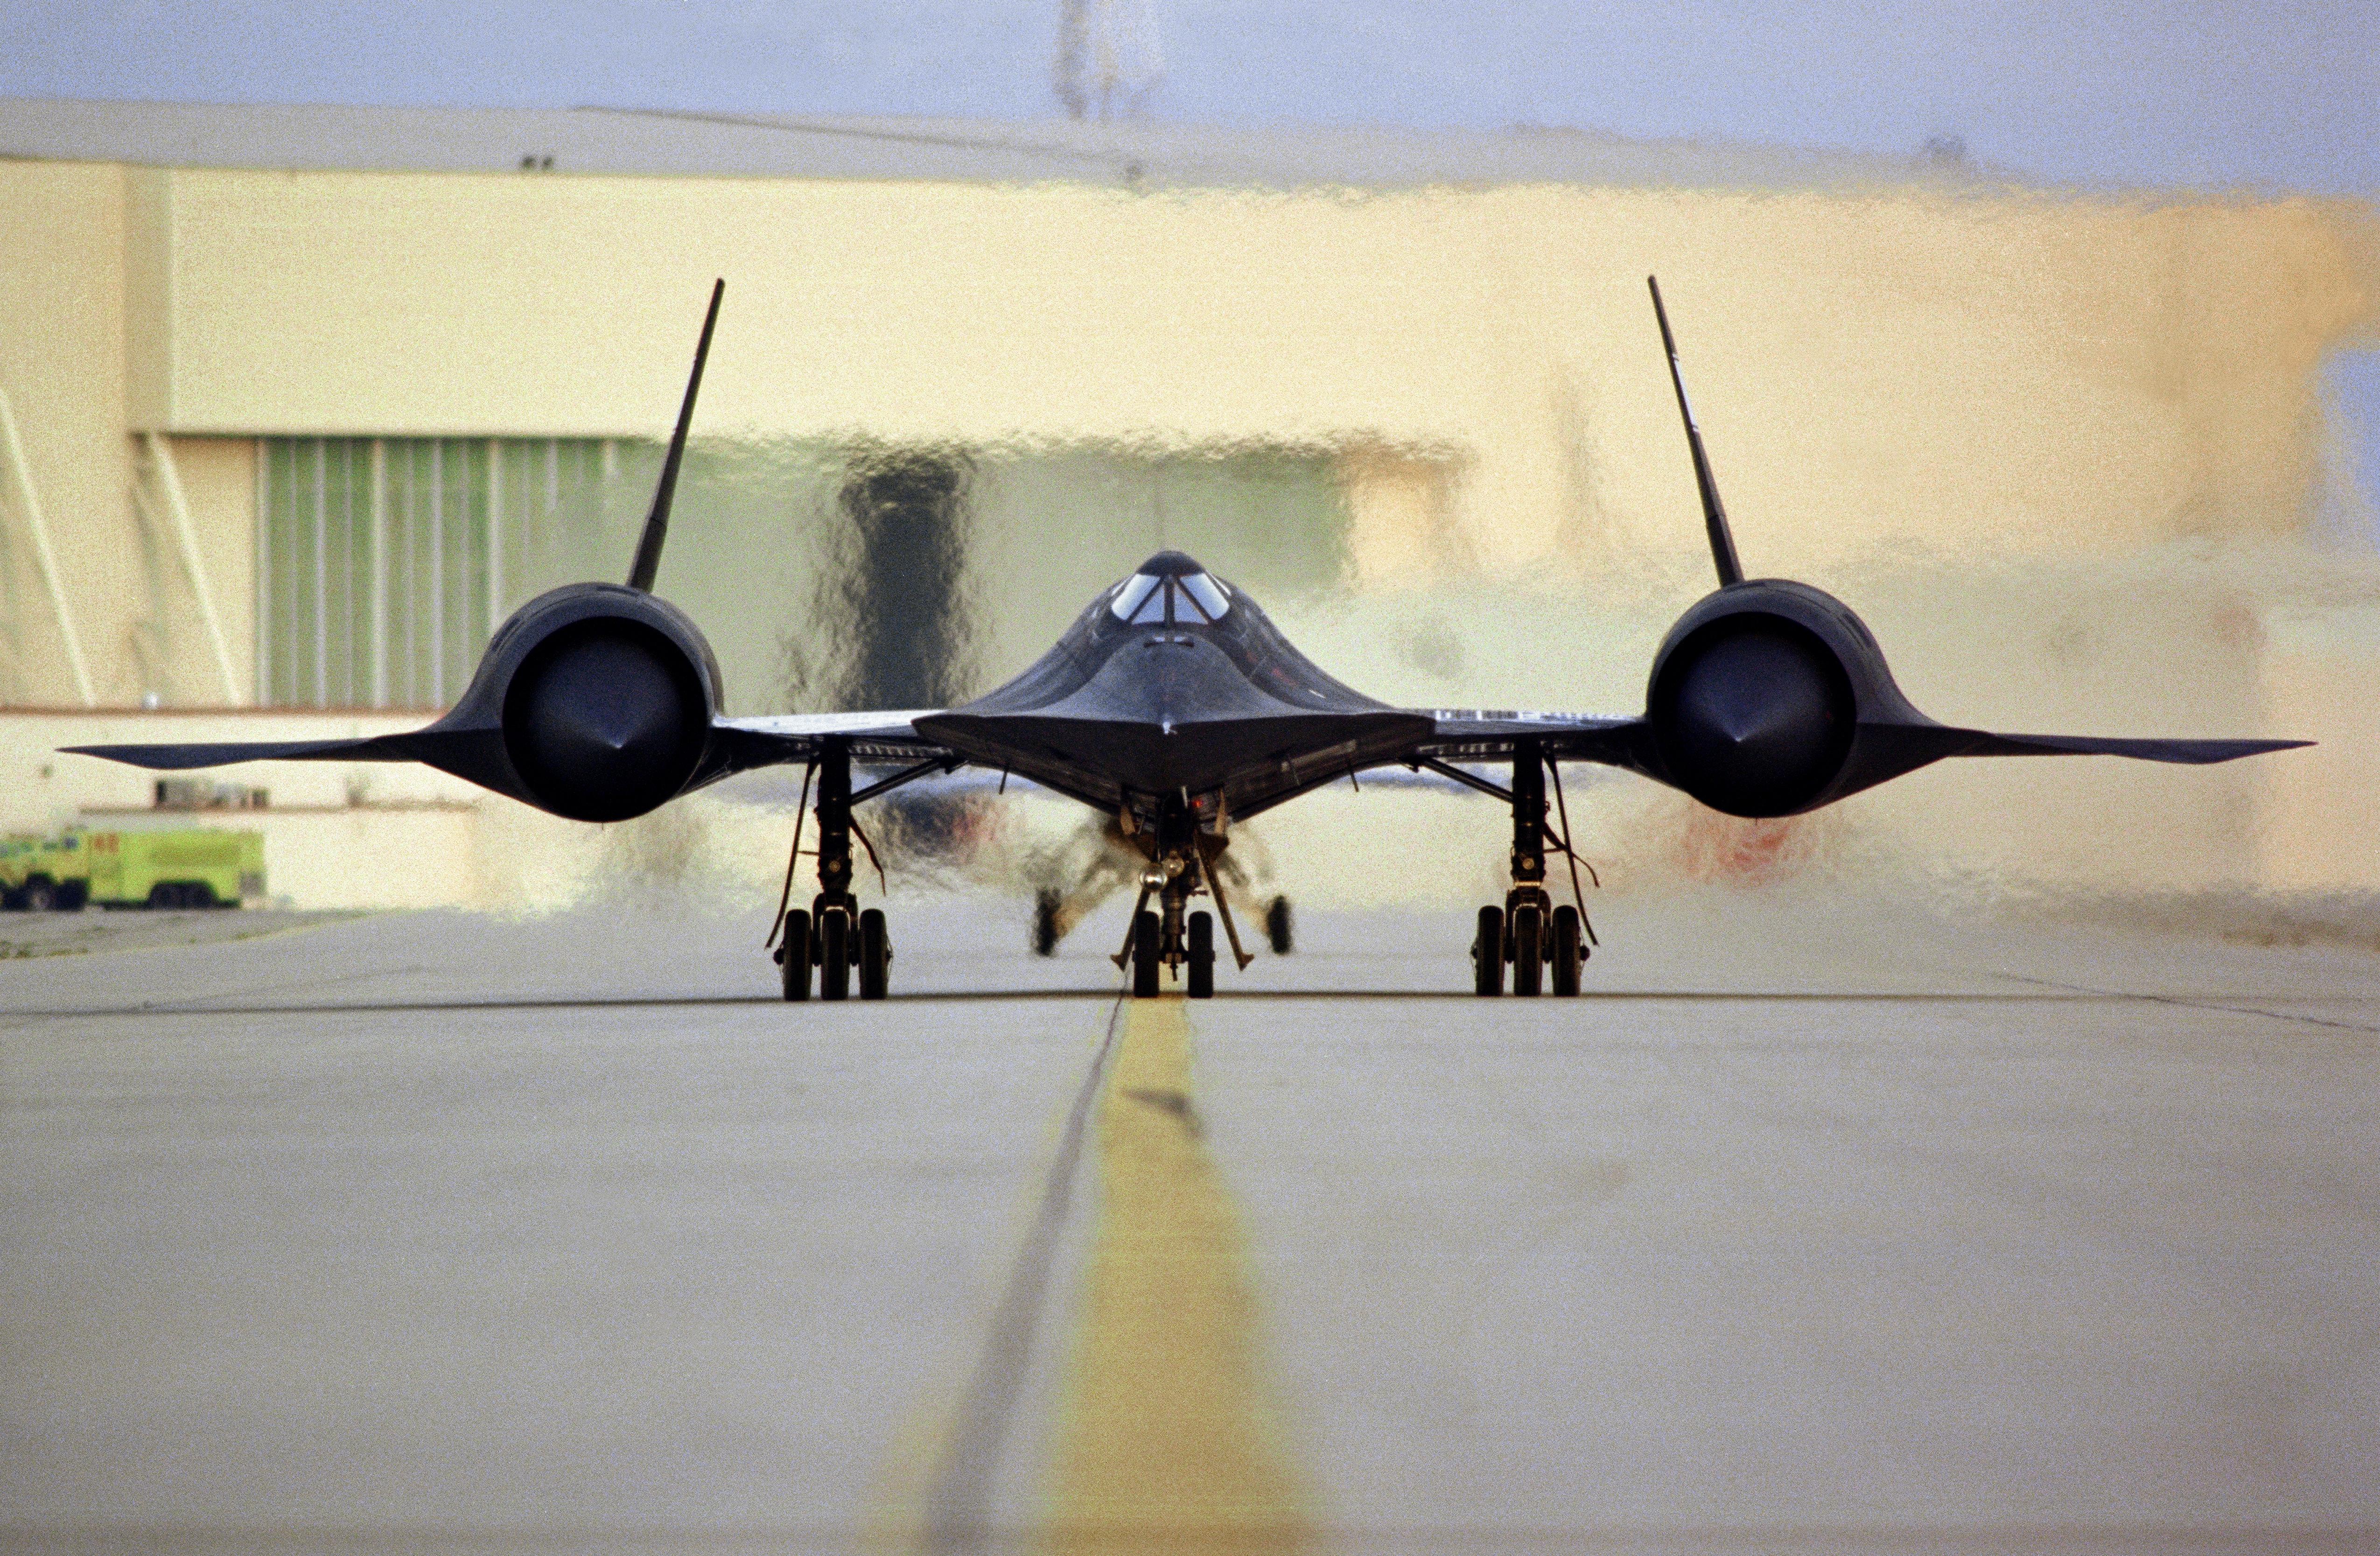 lockheed sr 71 blackbird, special forces, military, military aircraft wallpaper for mobile